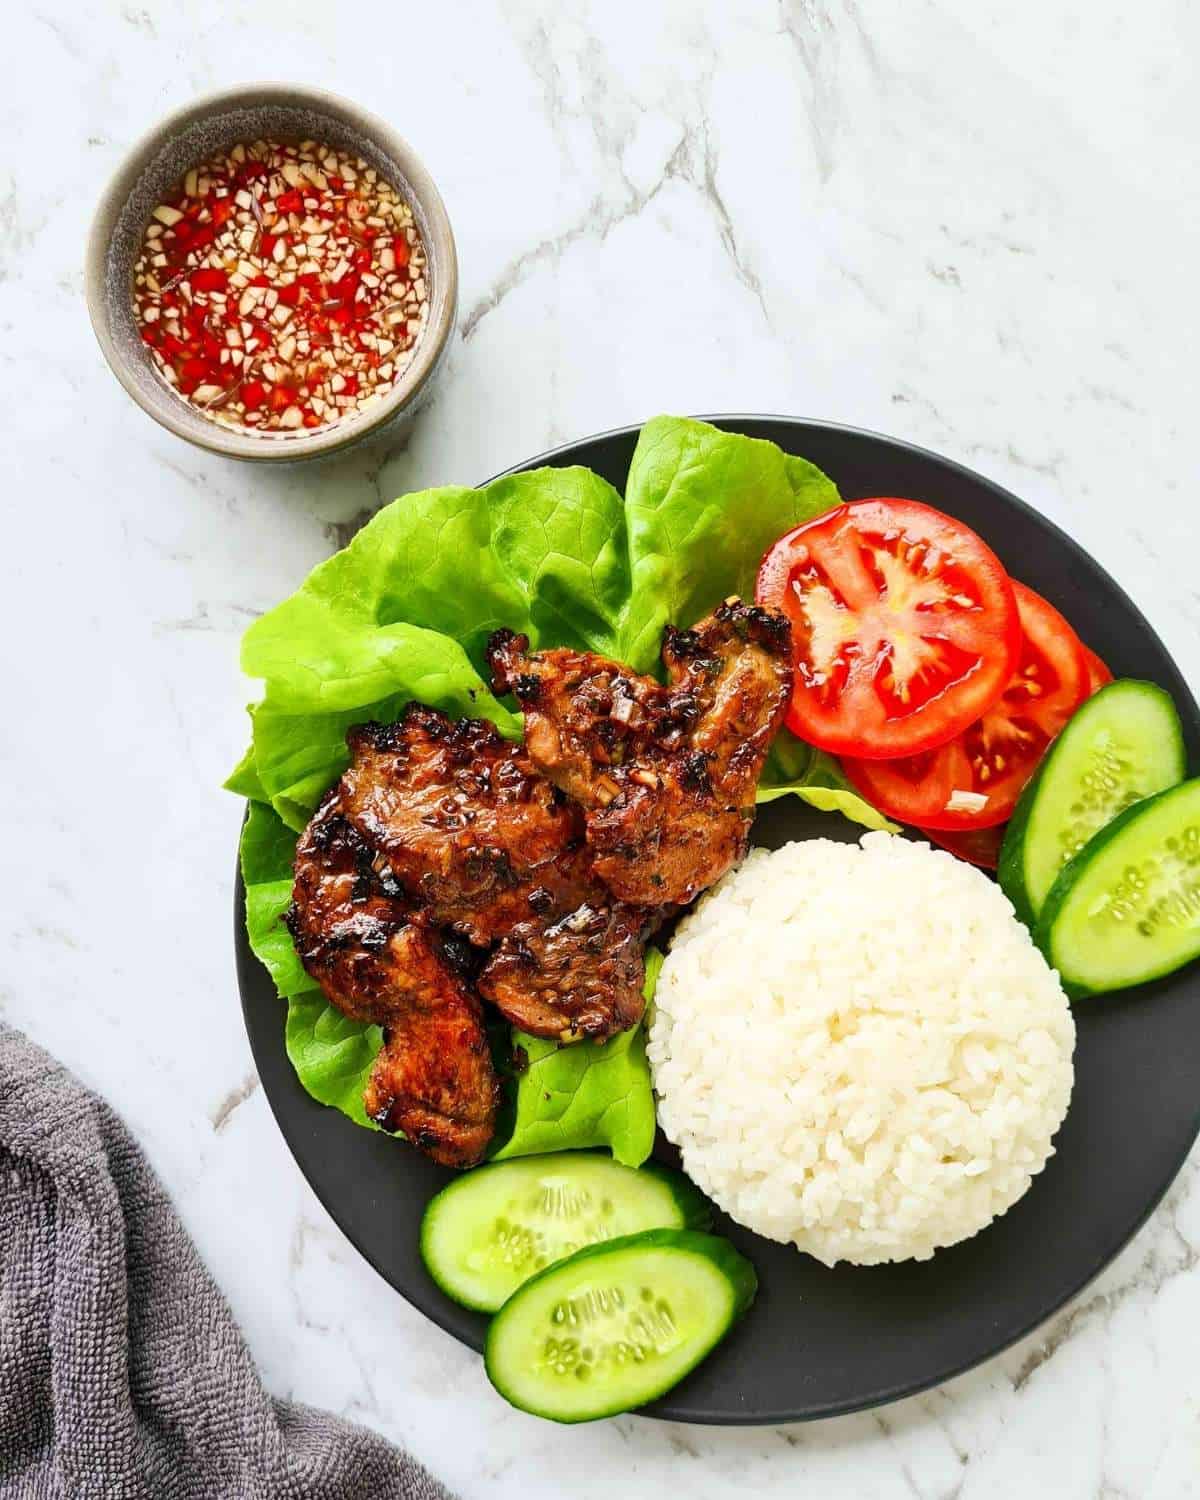 A plate of Vietnamese pork and rice with a side of dipping sauce